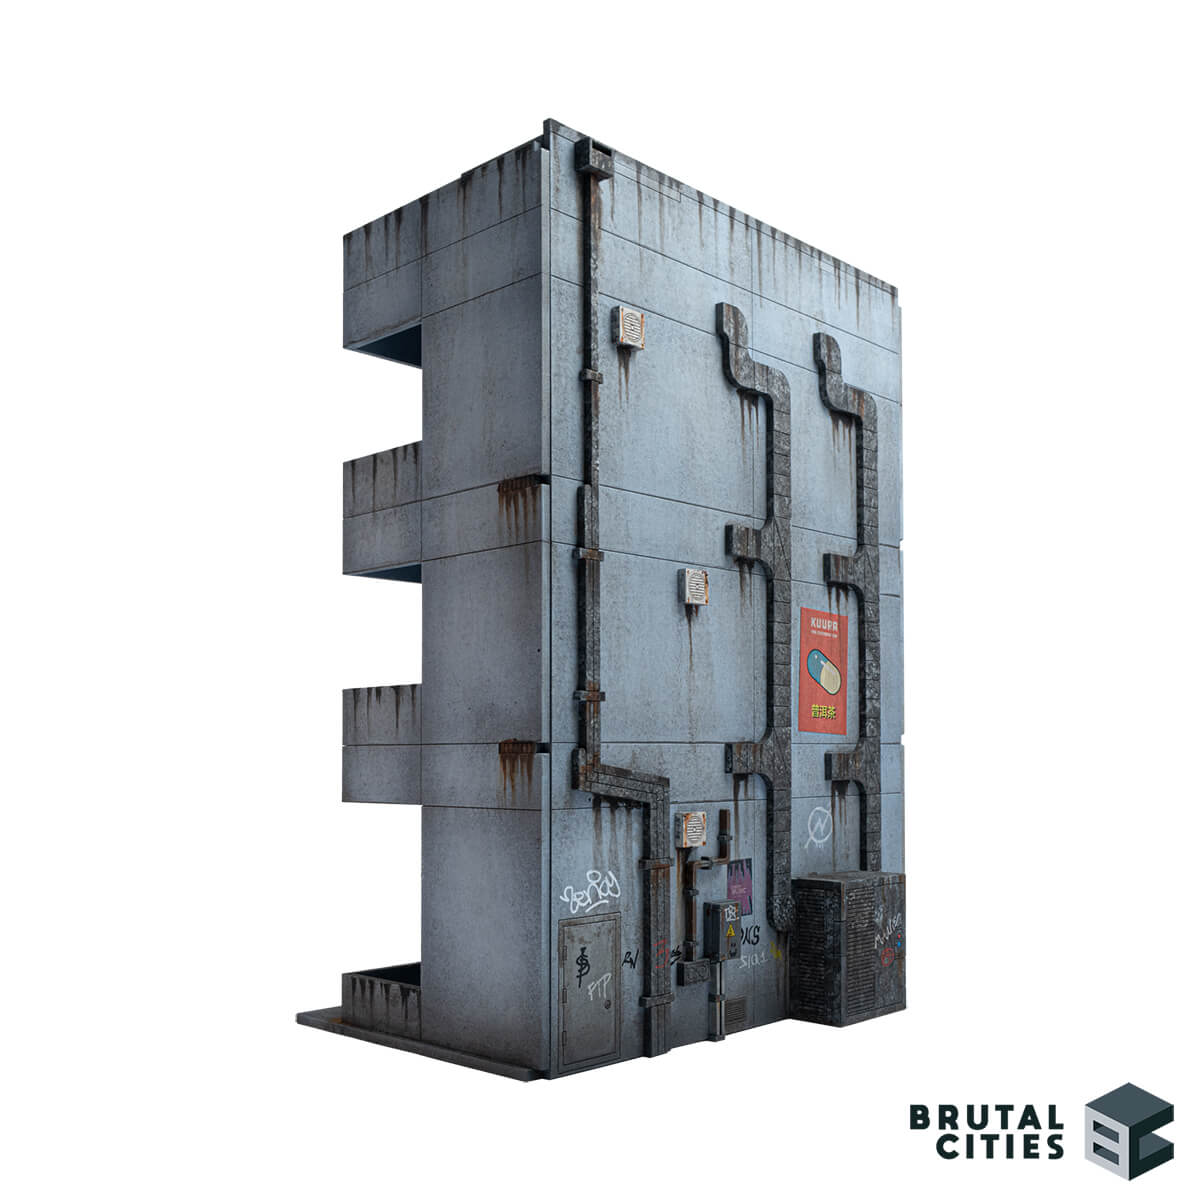 28mm terrain office building with cyberpunk posters and ducting